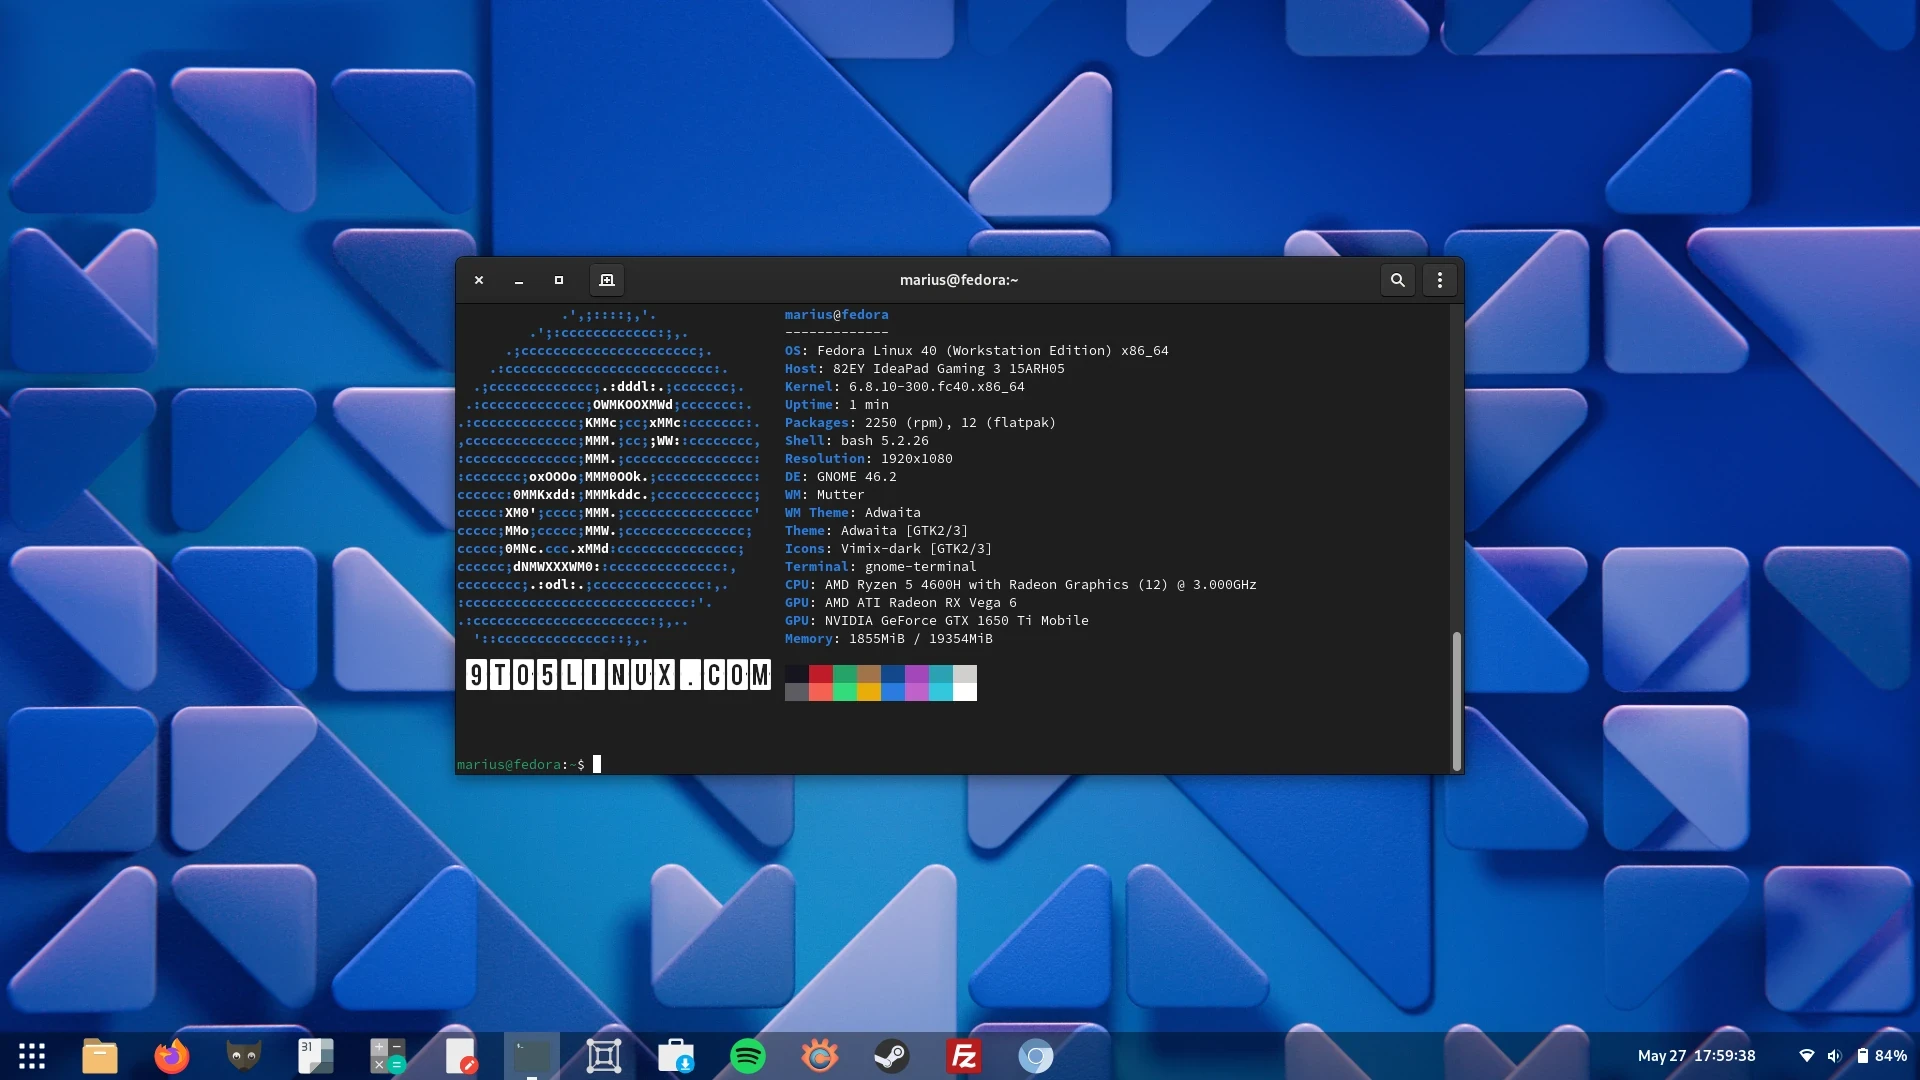 Screenshot of the GNOME 46.2 desktop environment on Fedora Linux 40 Workstation showing the GNOME Console app with an output of the neofetch command.